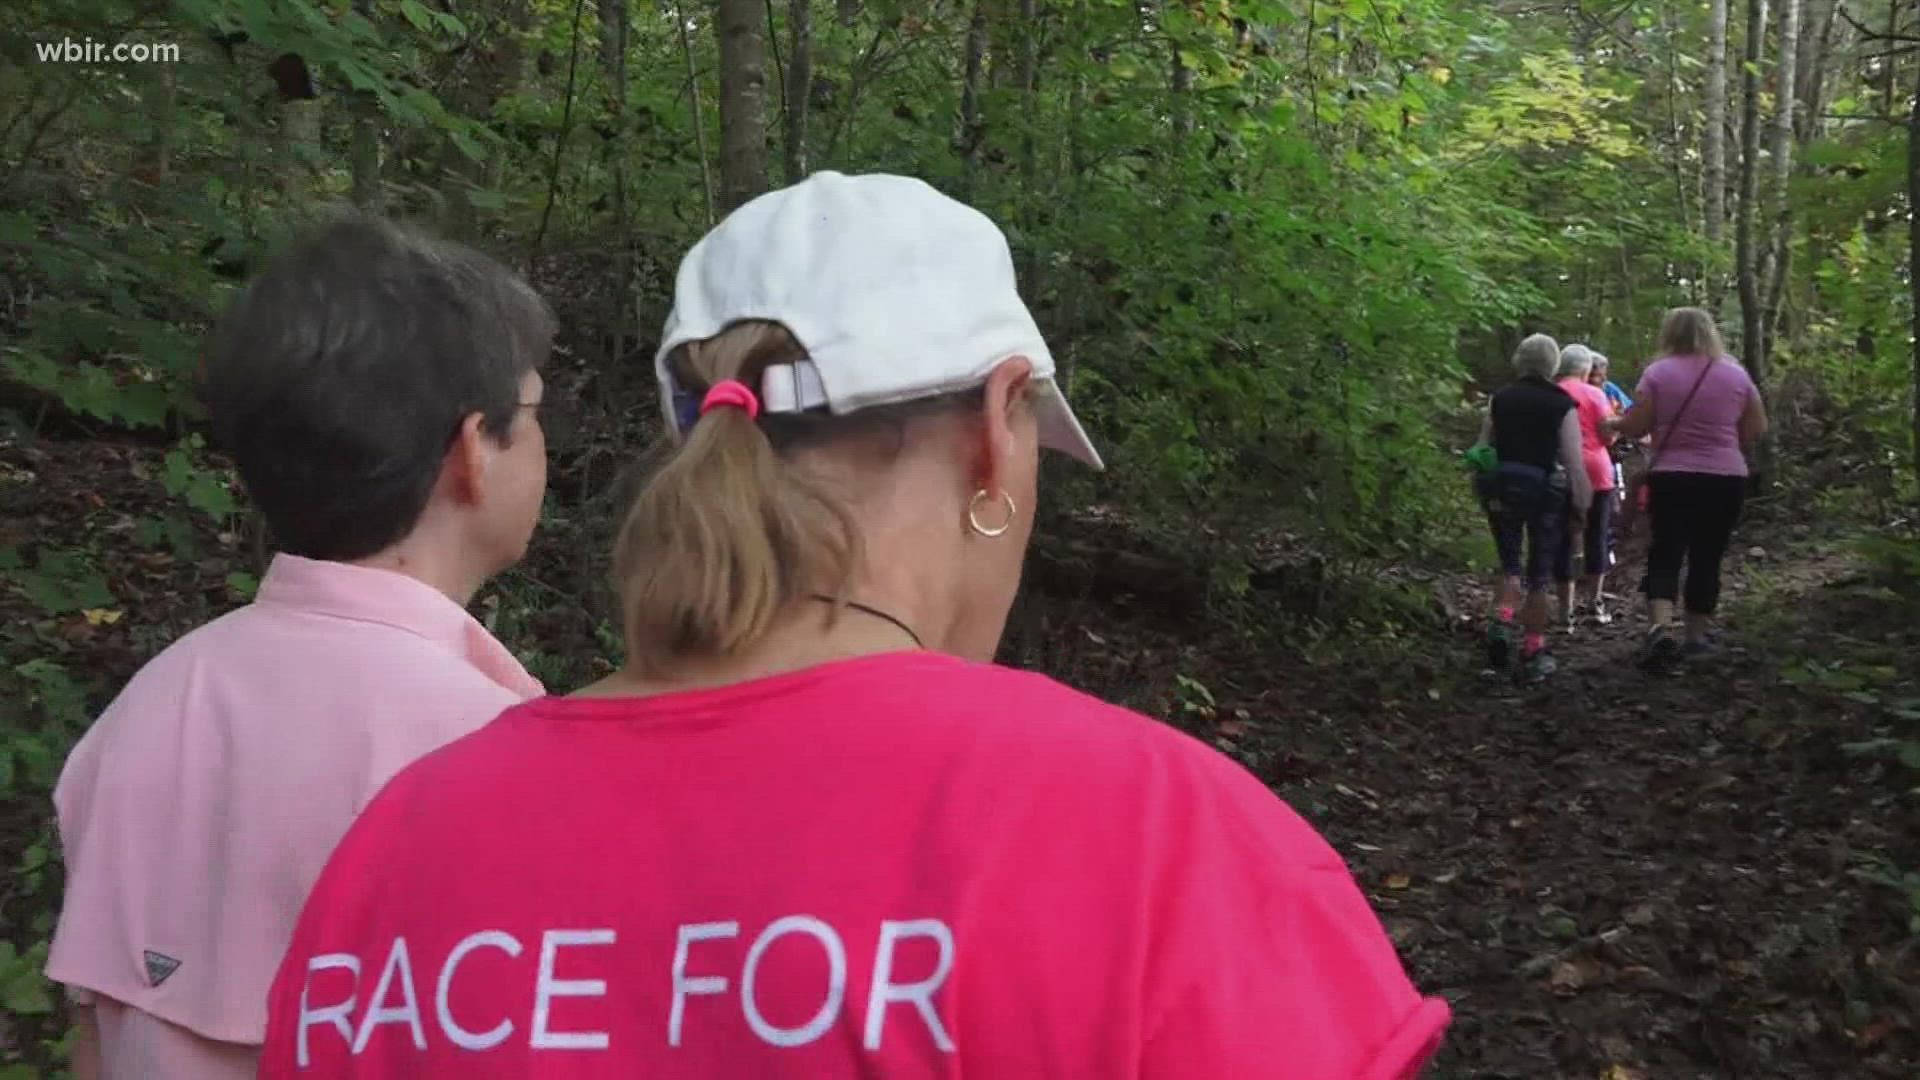 Dolphin Riggs started Hiking for Healing in 2018. Since then, she's taken to the trails to lift up breast cancer fighters and survivors on their journeys.